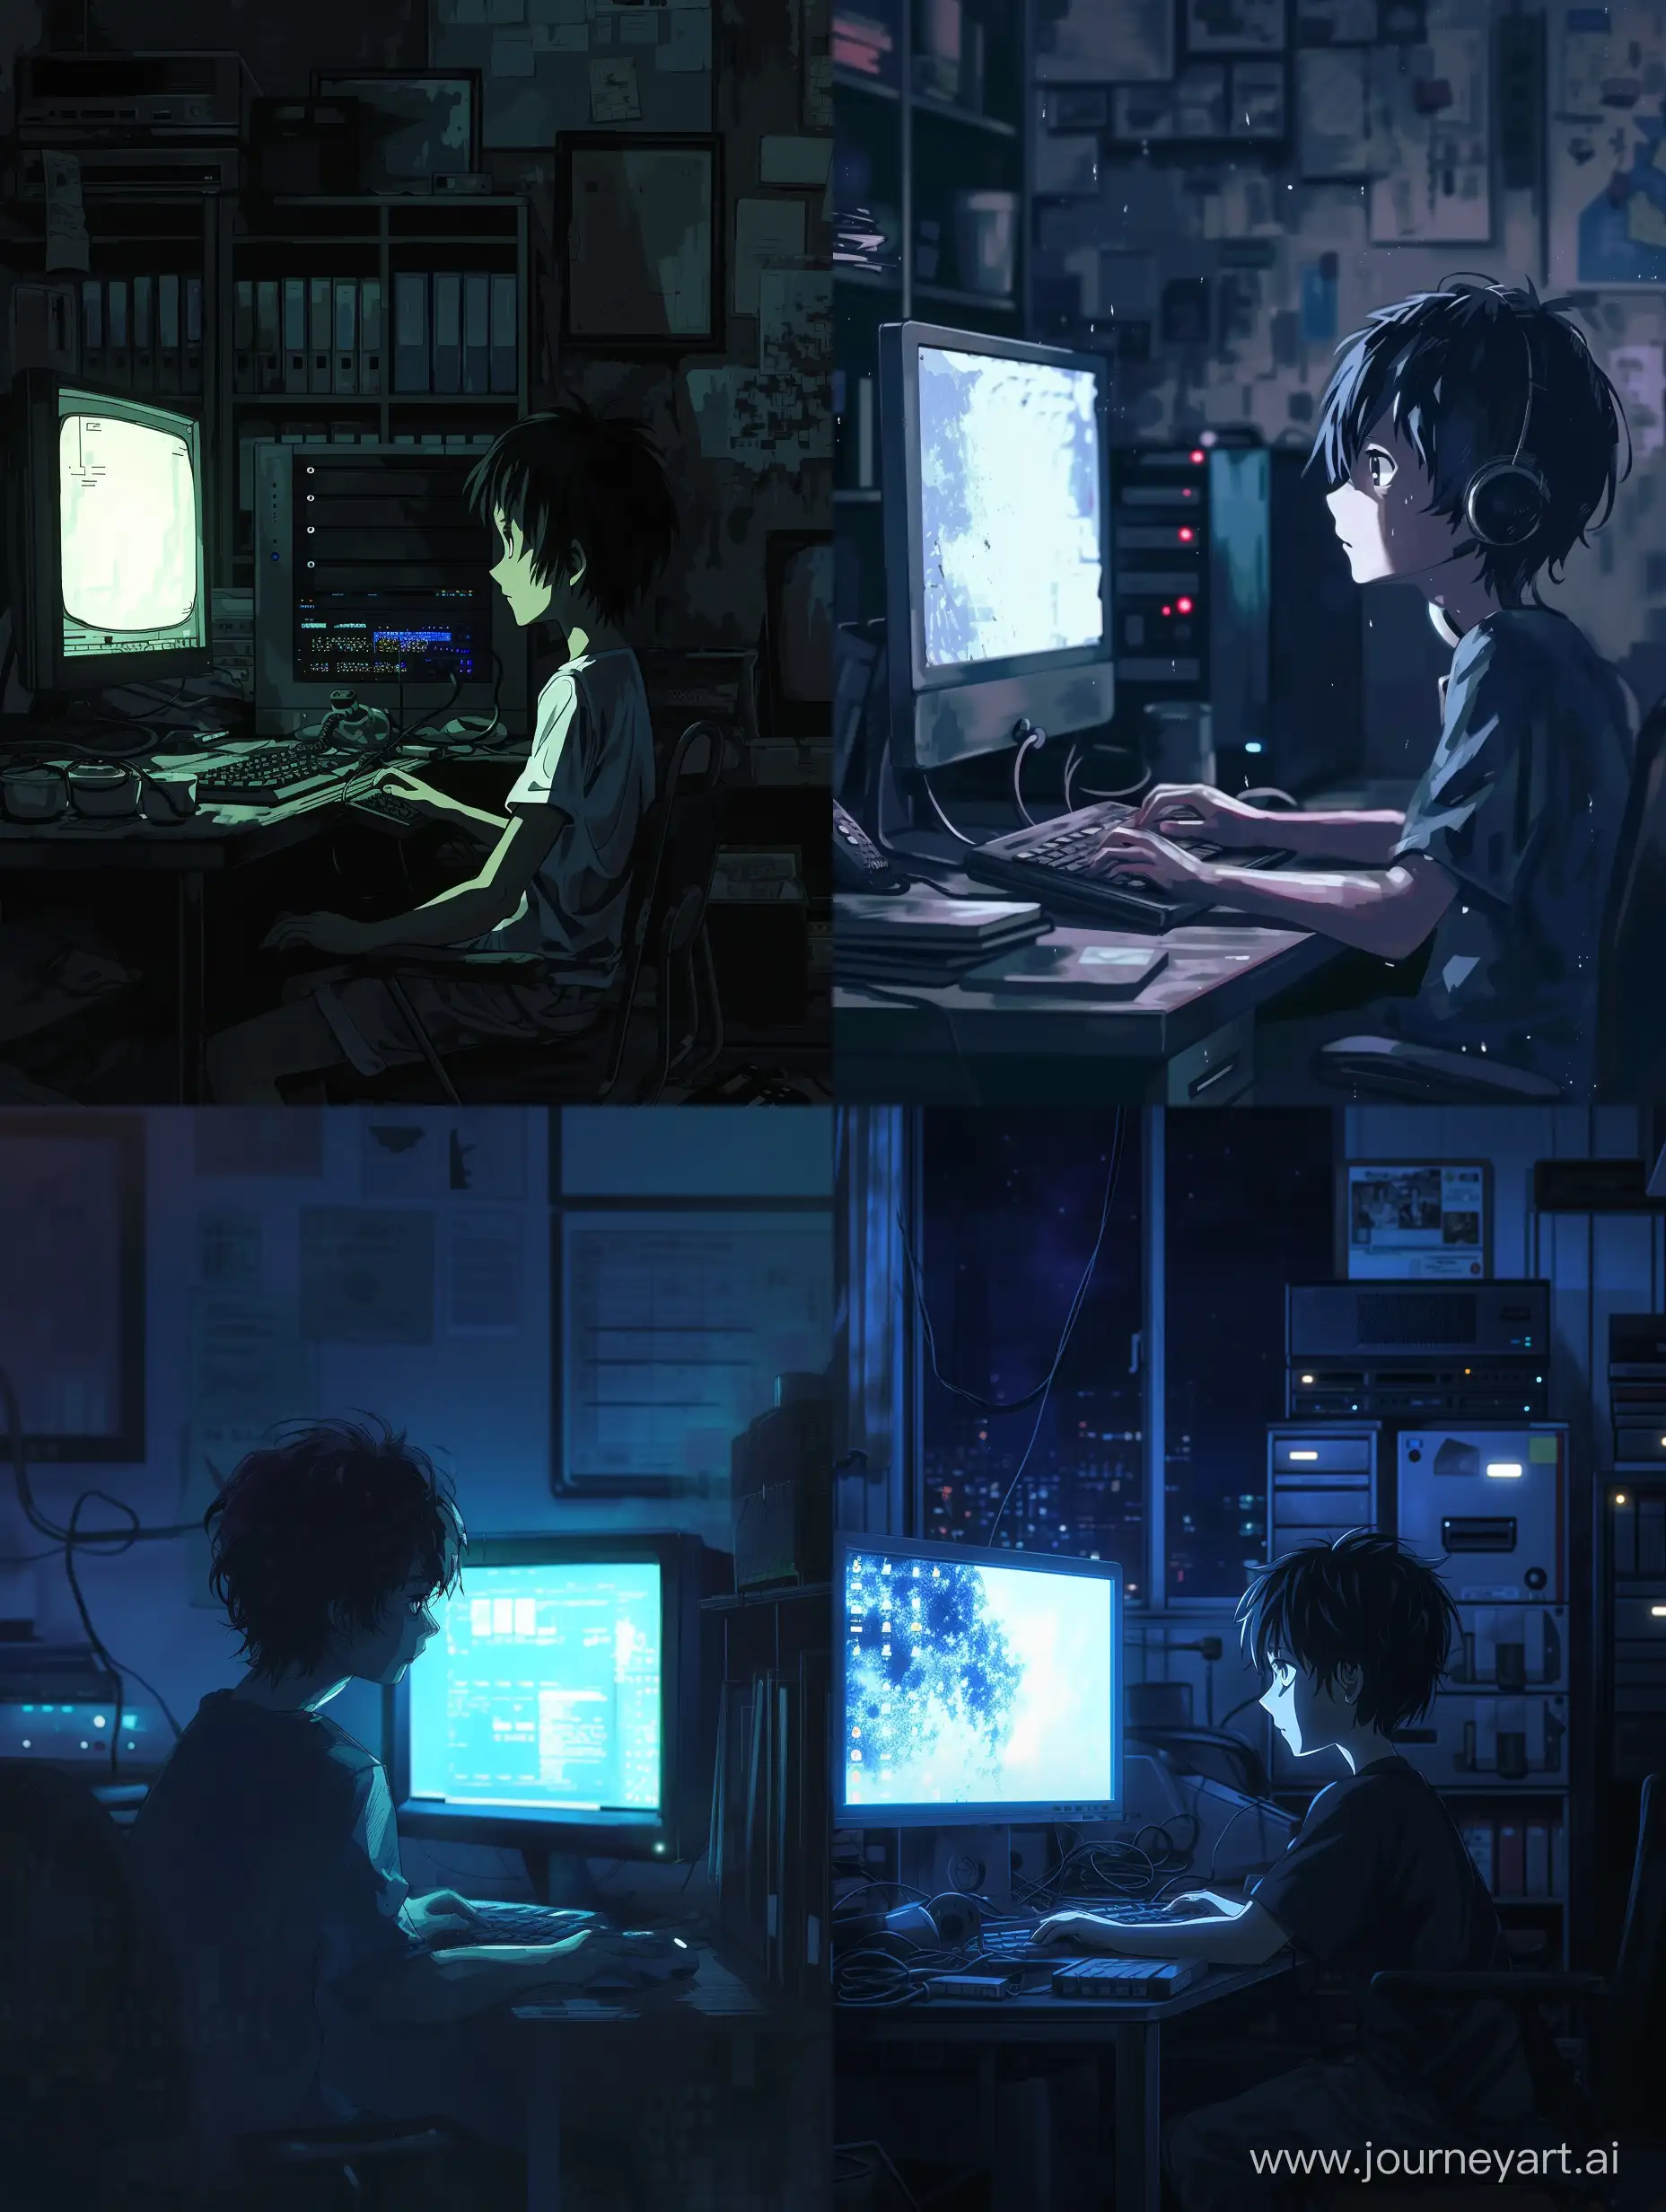 Anime-Boy-Engrossed-in-Computer-Activity-in-Dimly-Lit-Room